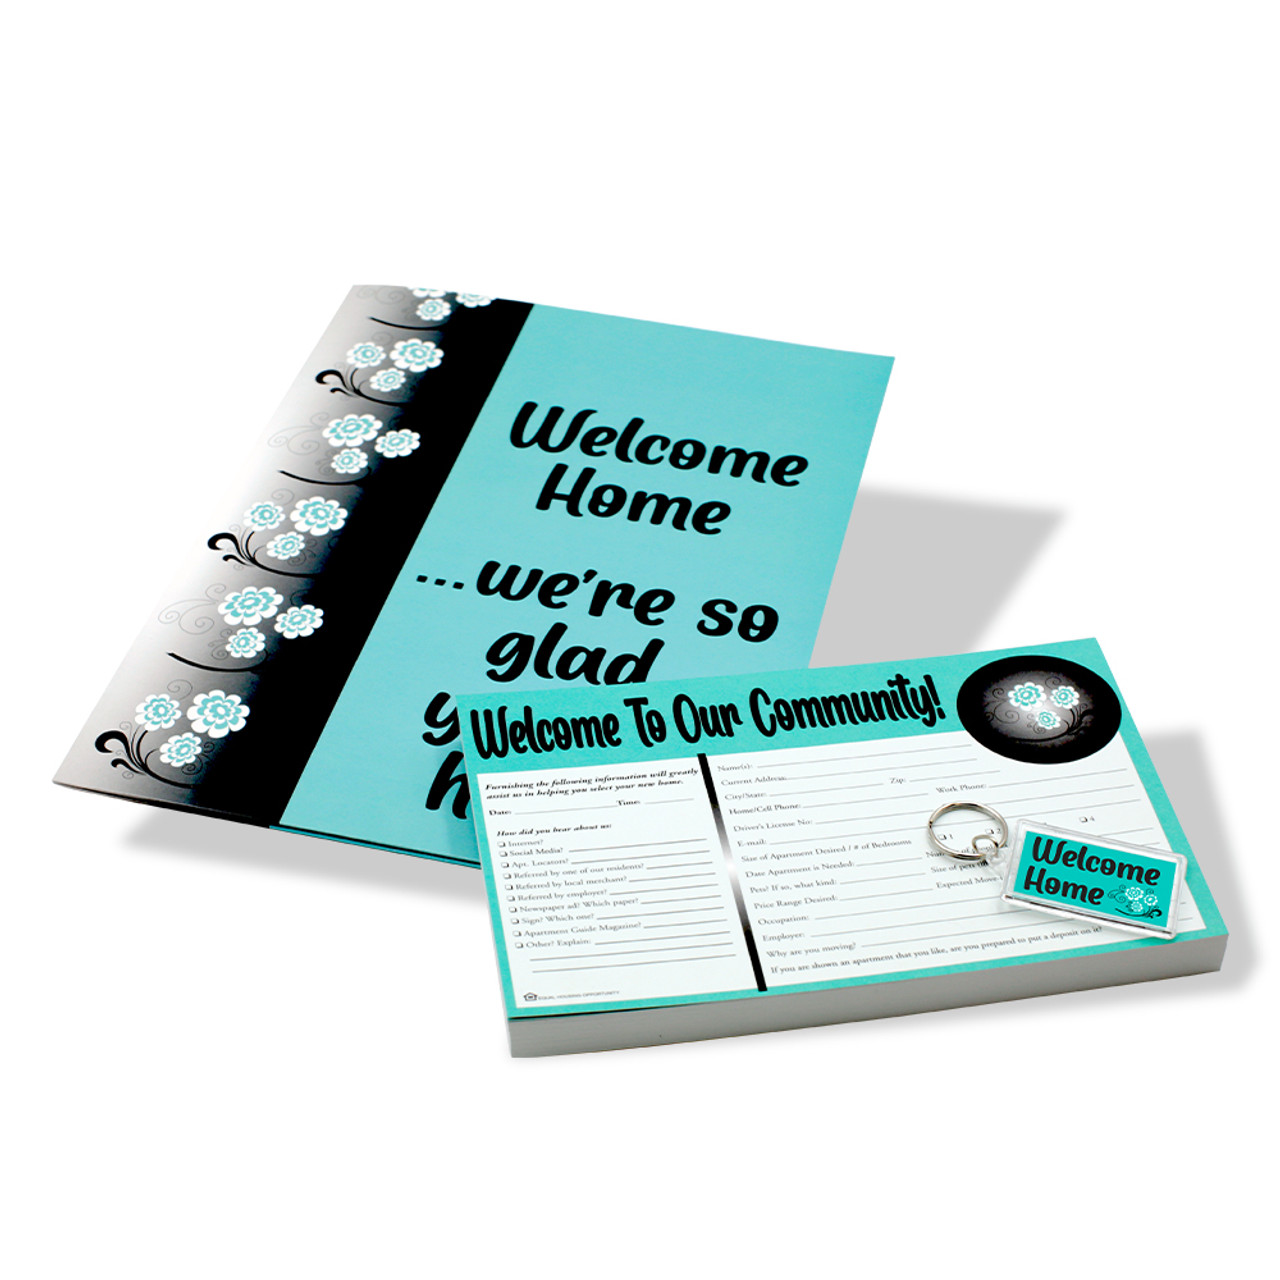 Teal Flowers - Wecome Leasing Marketing Kits